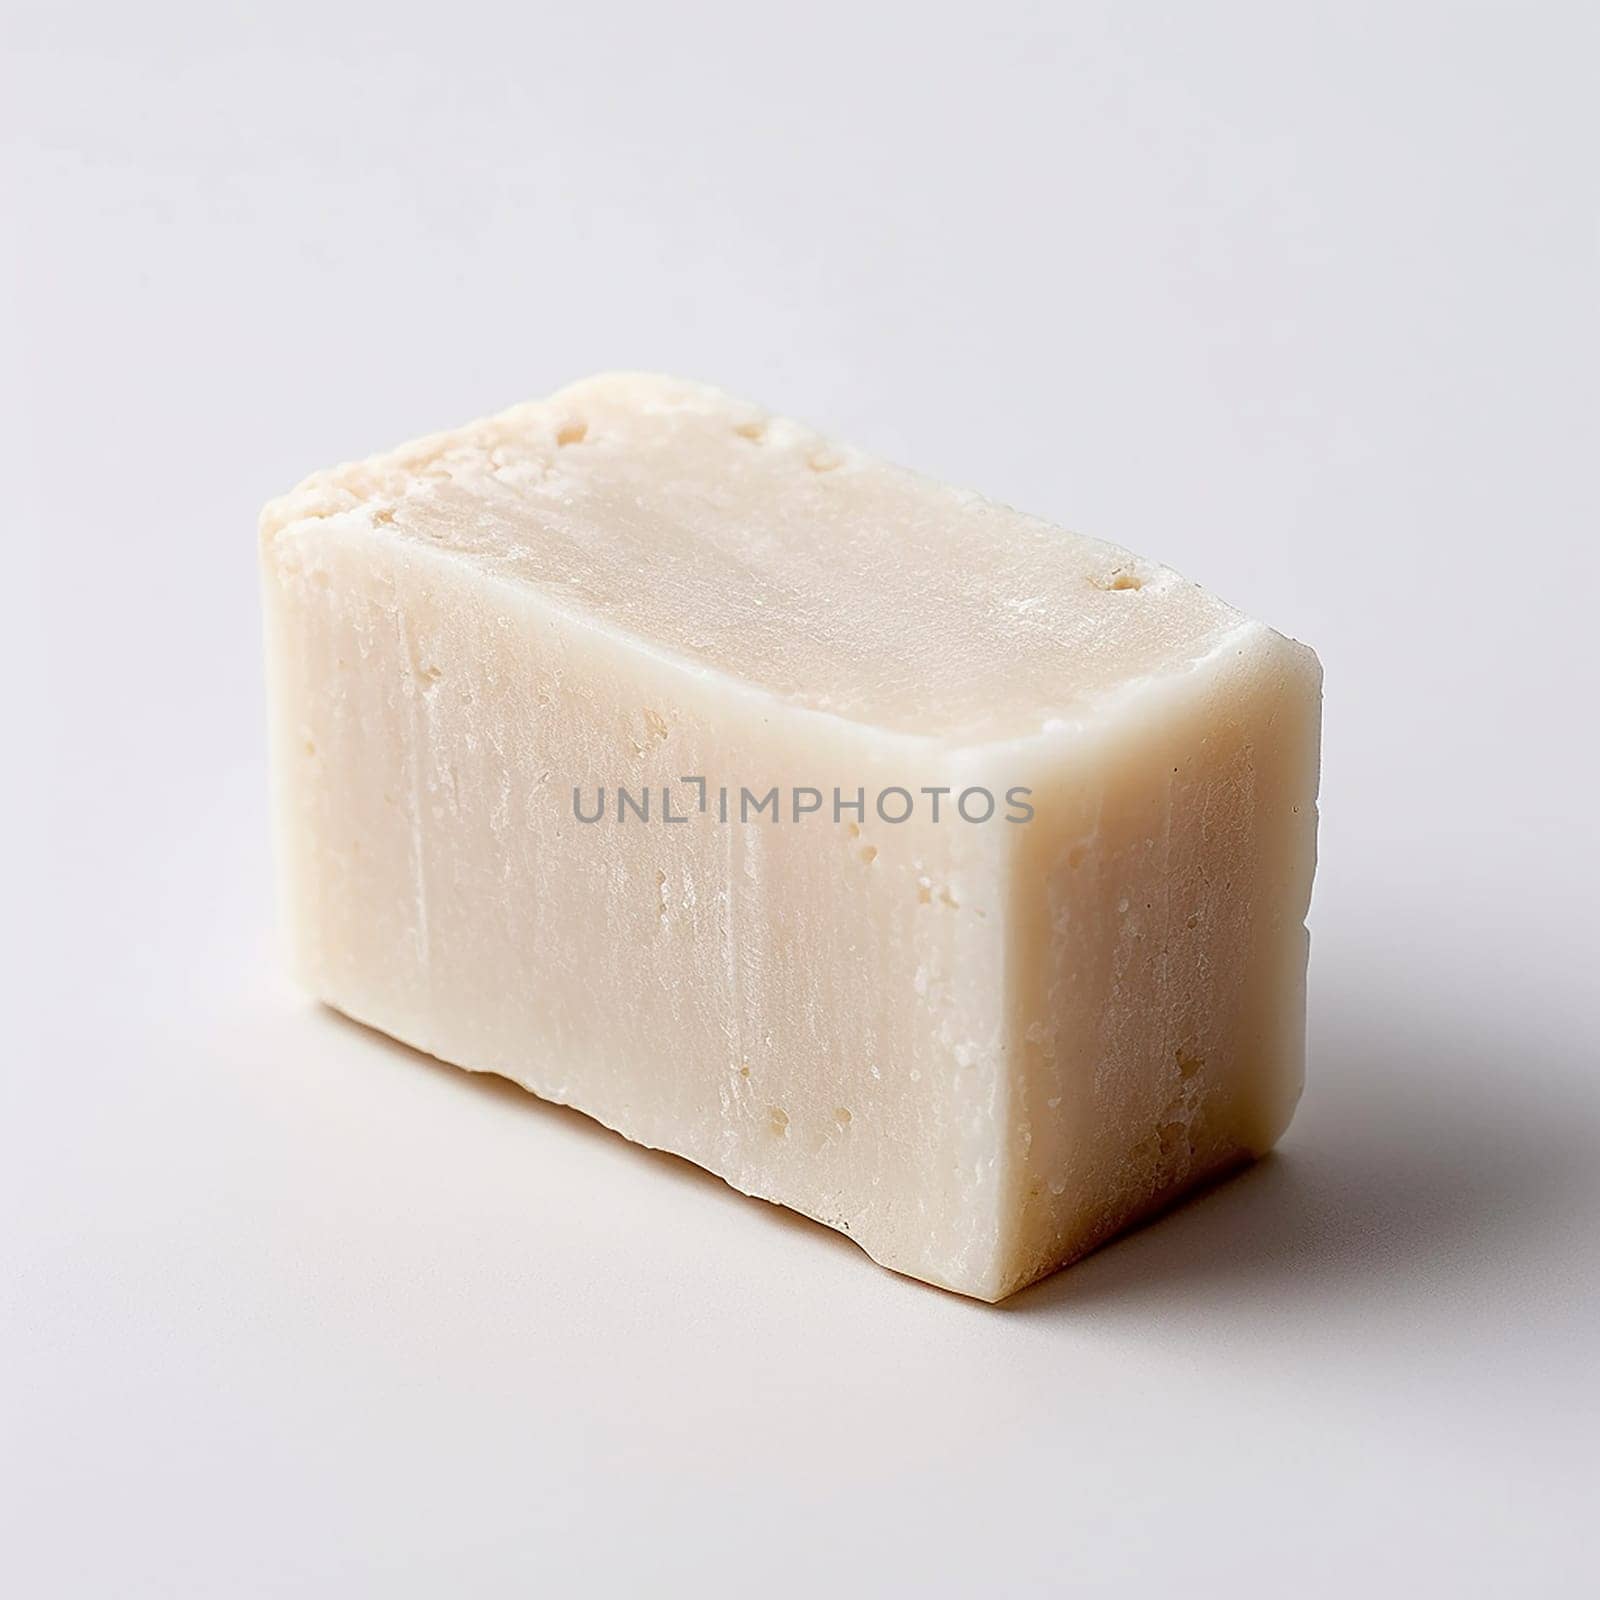 Rectangular solid bar of white soap, possibly homemade, with a textured surface.